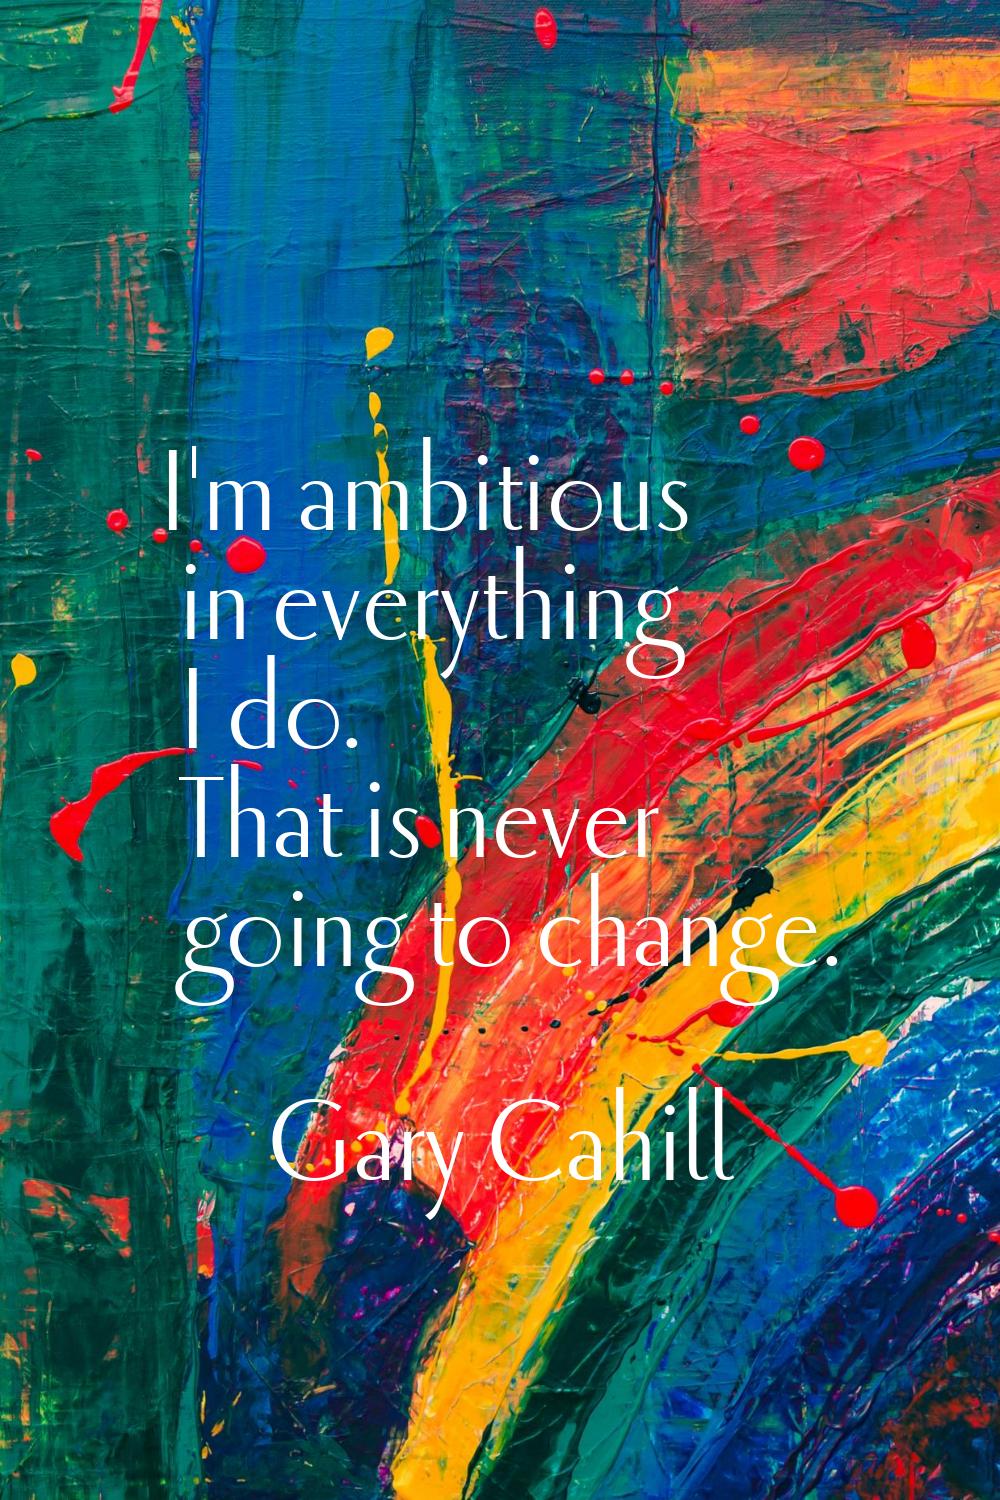 I'm ambitious in everything I do. That is never going to change.